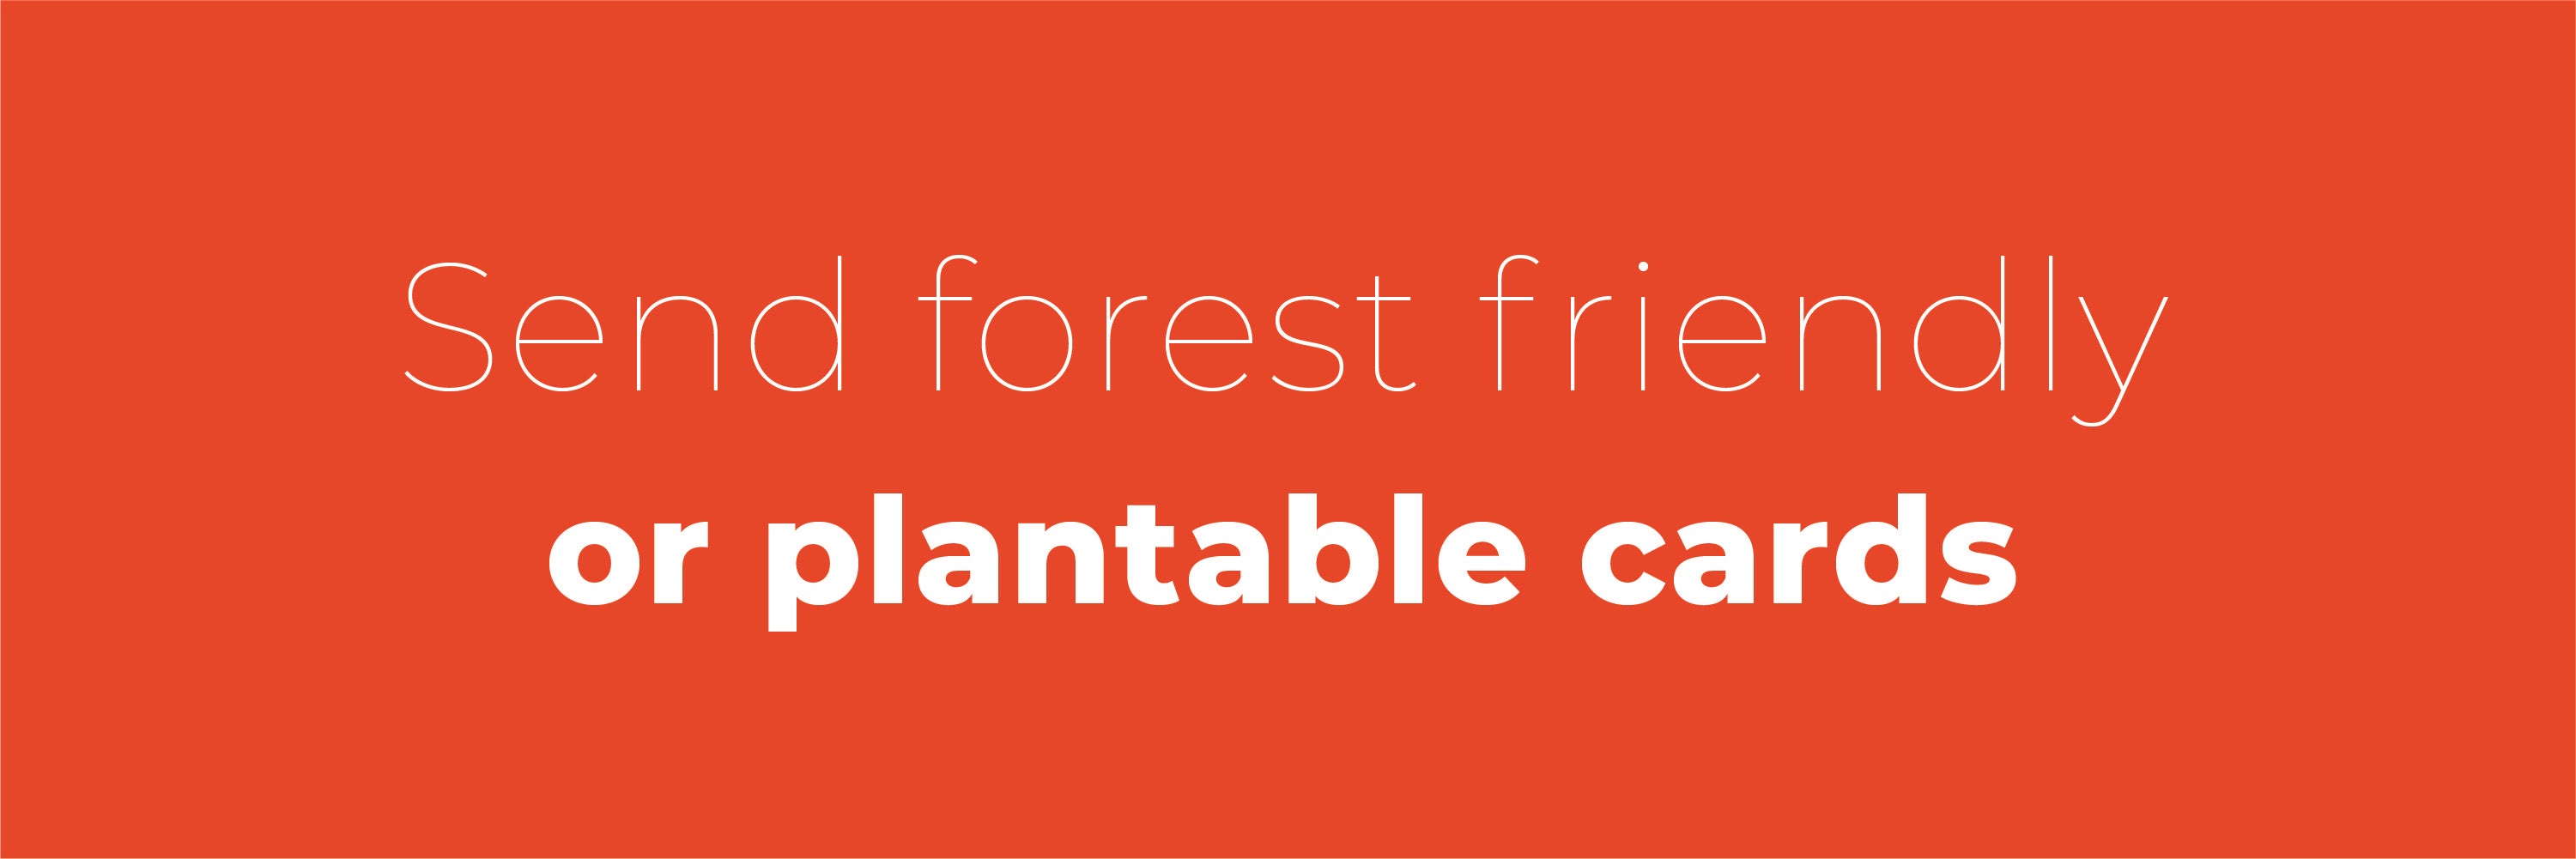 Send forest friendly or plantable cards